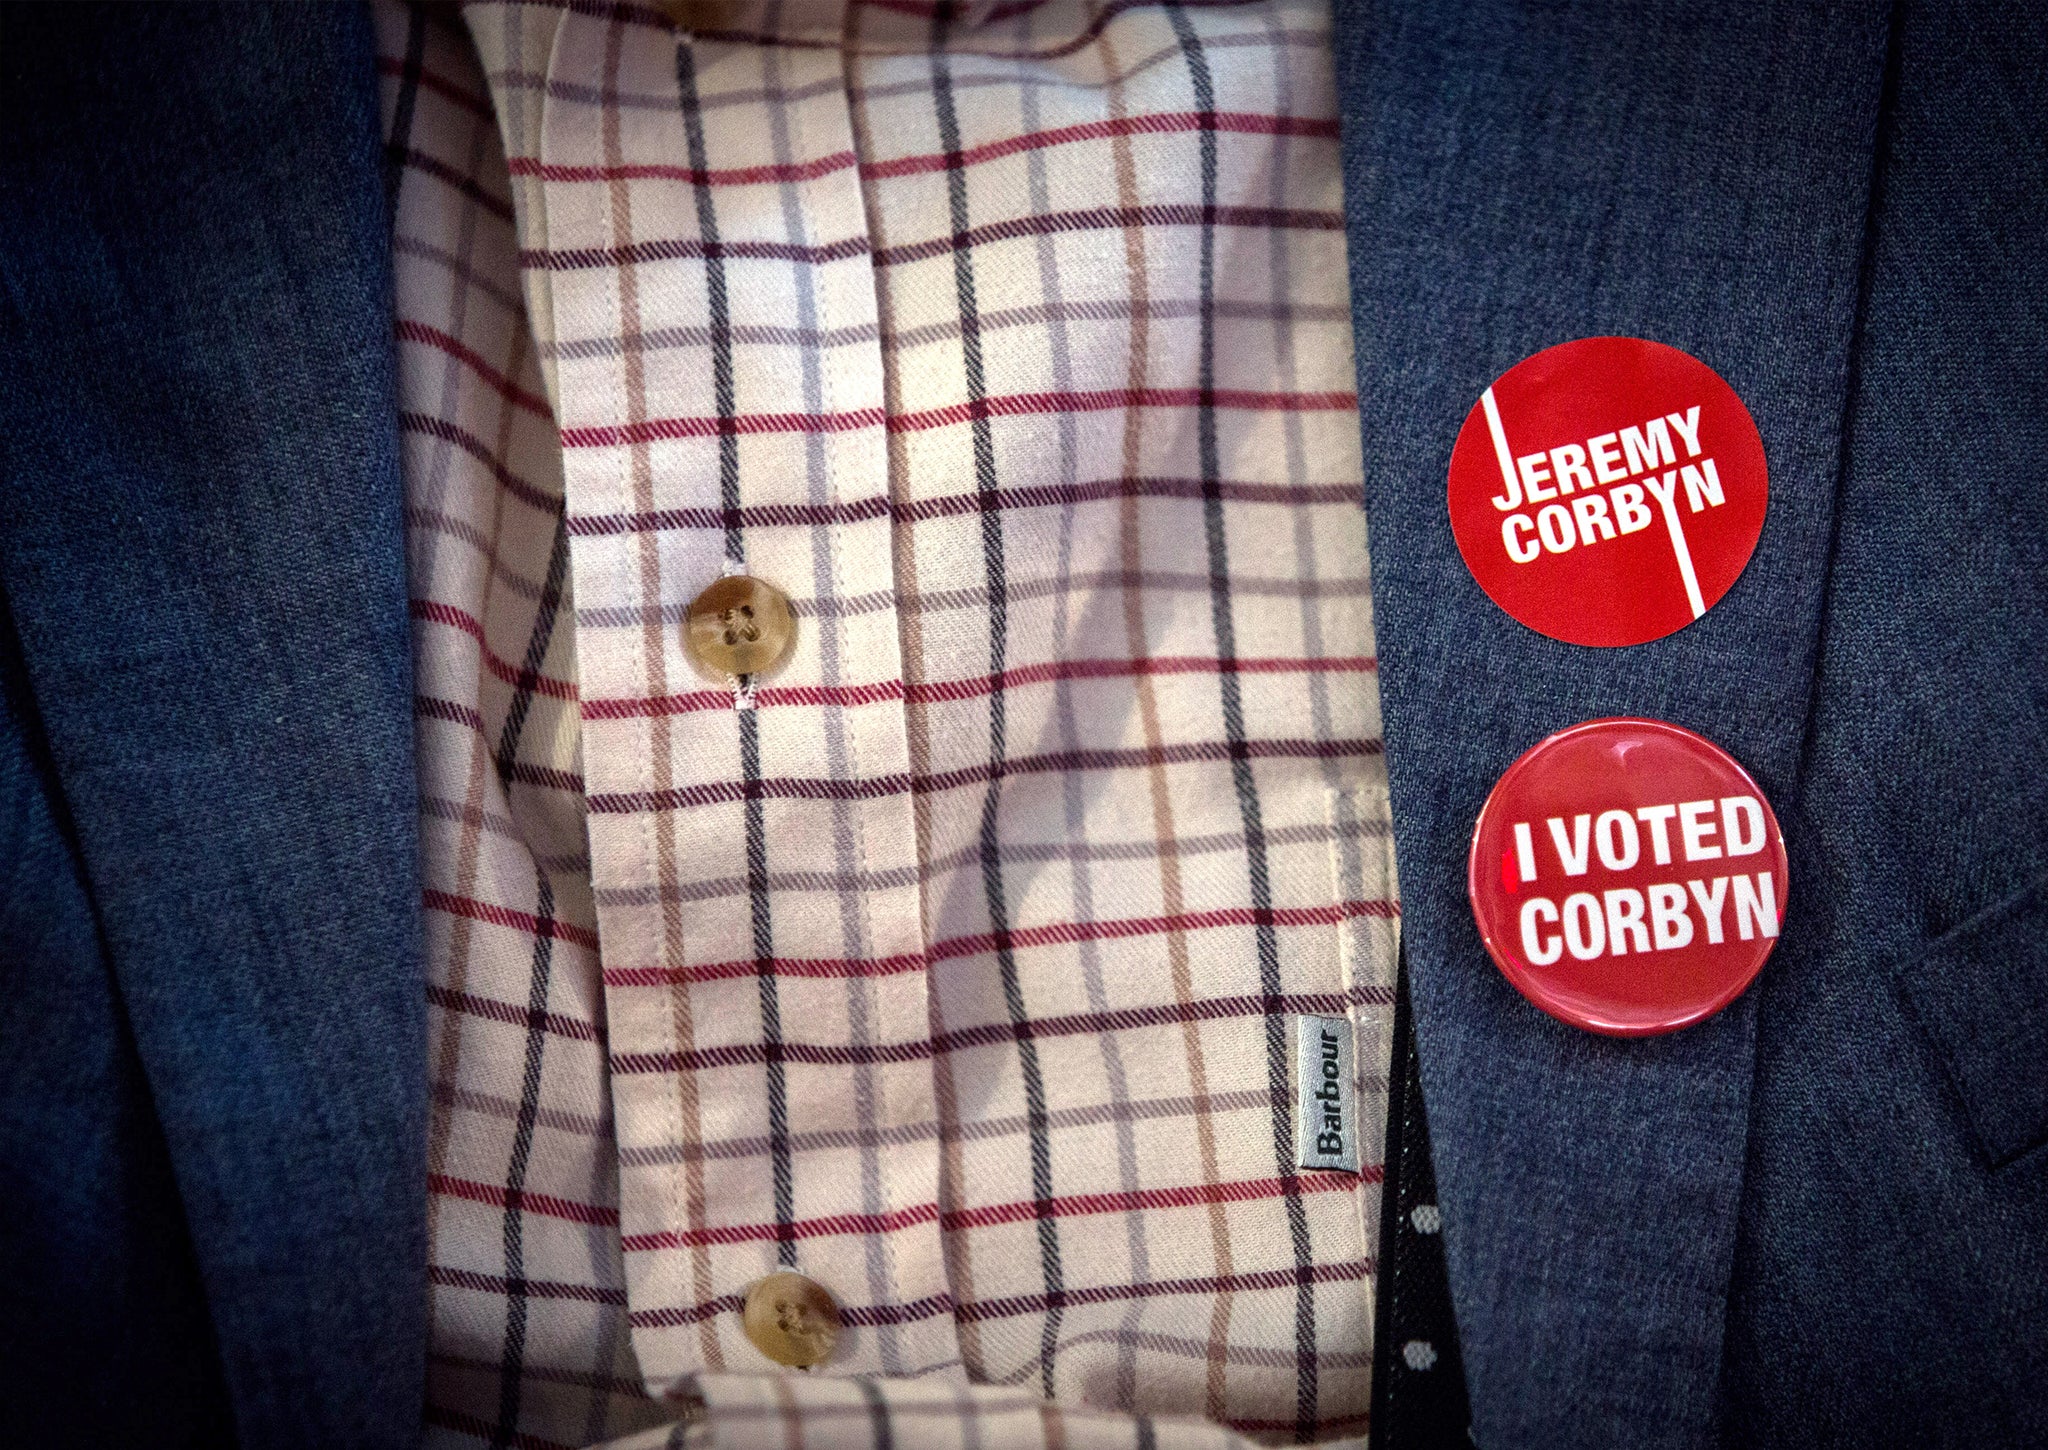 A supporter of Jeremy Corbyn, MP for Islington North and candidate in the Labour Party leadership election, wears badges on a jacket during speaches at the Rock Tower on September 10, 2015